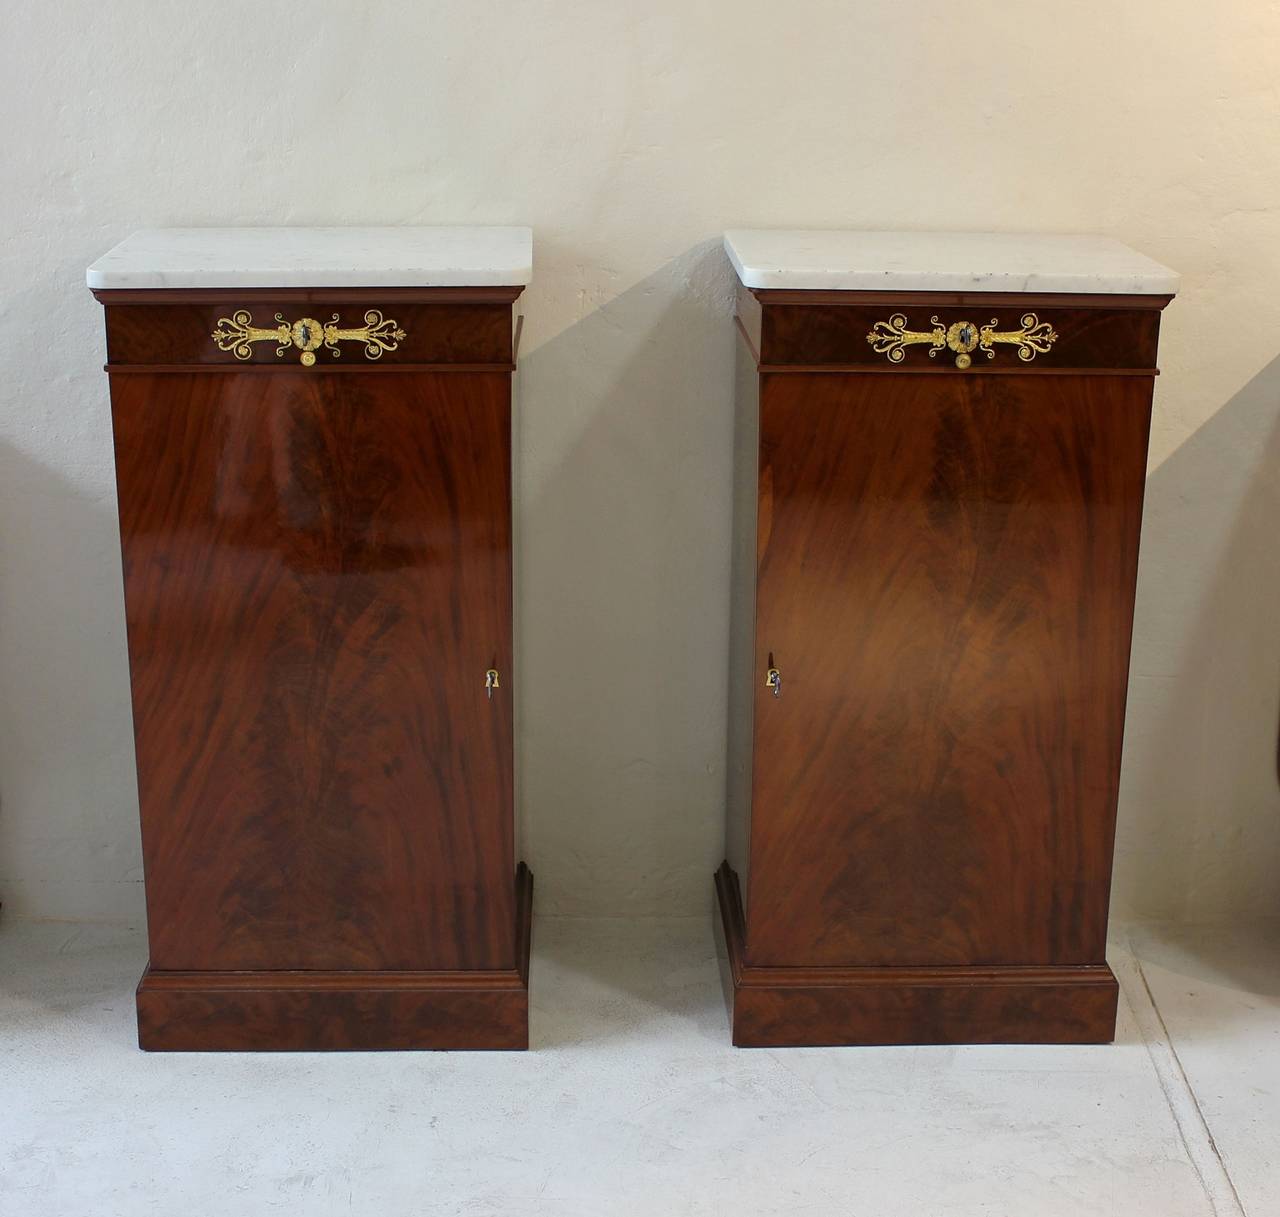 Early 19th Century Pair of Jacob French Empire Flame Mahogany Marble-Top Pedestal Cabinets